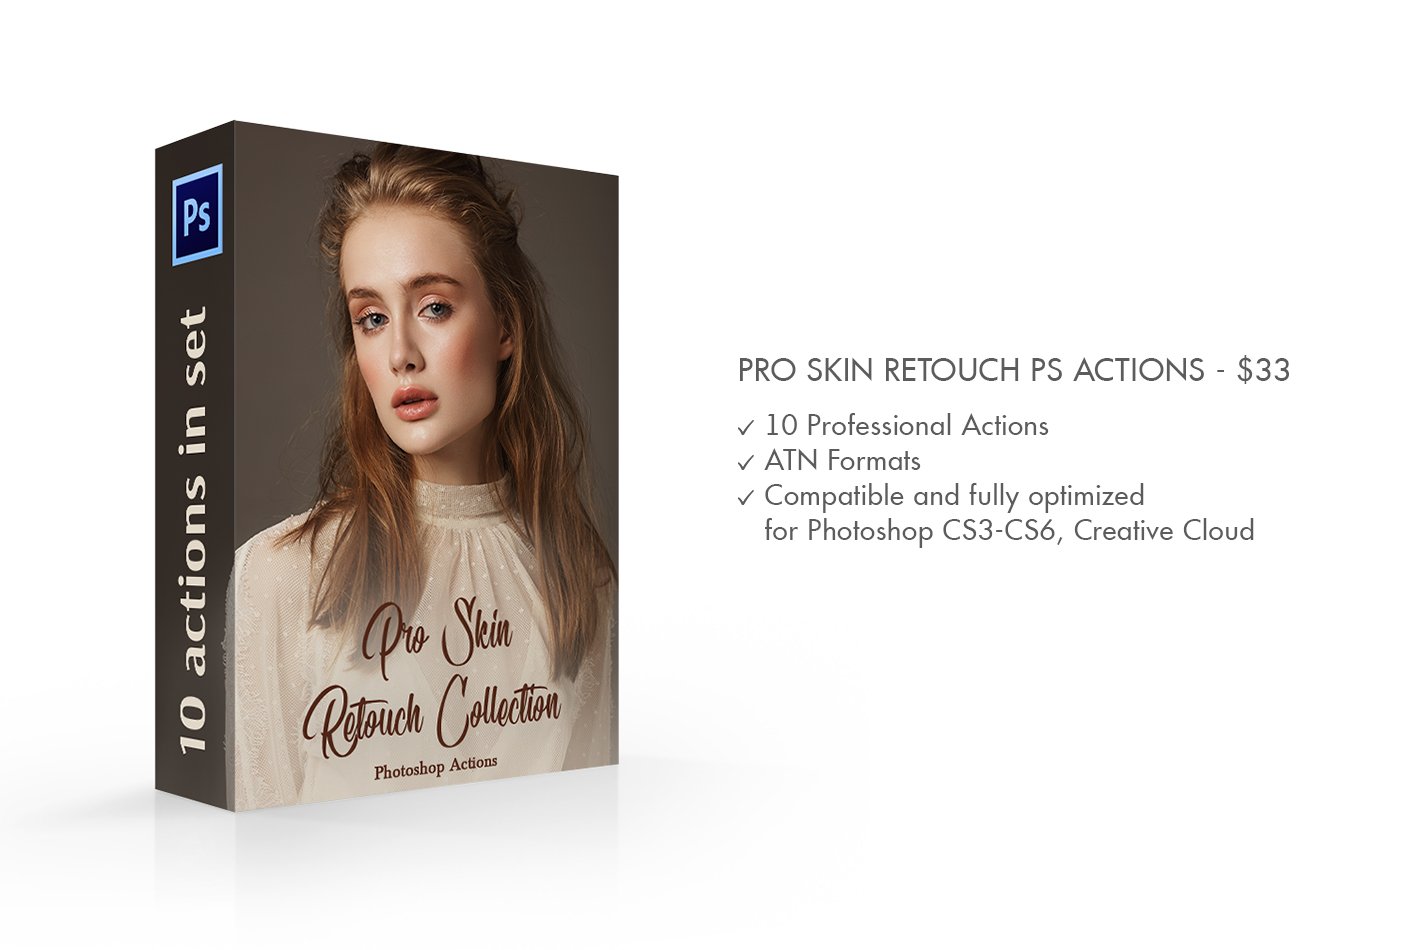 Pro Skin Retouch Photoshop Actionspreview image.